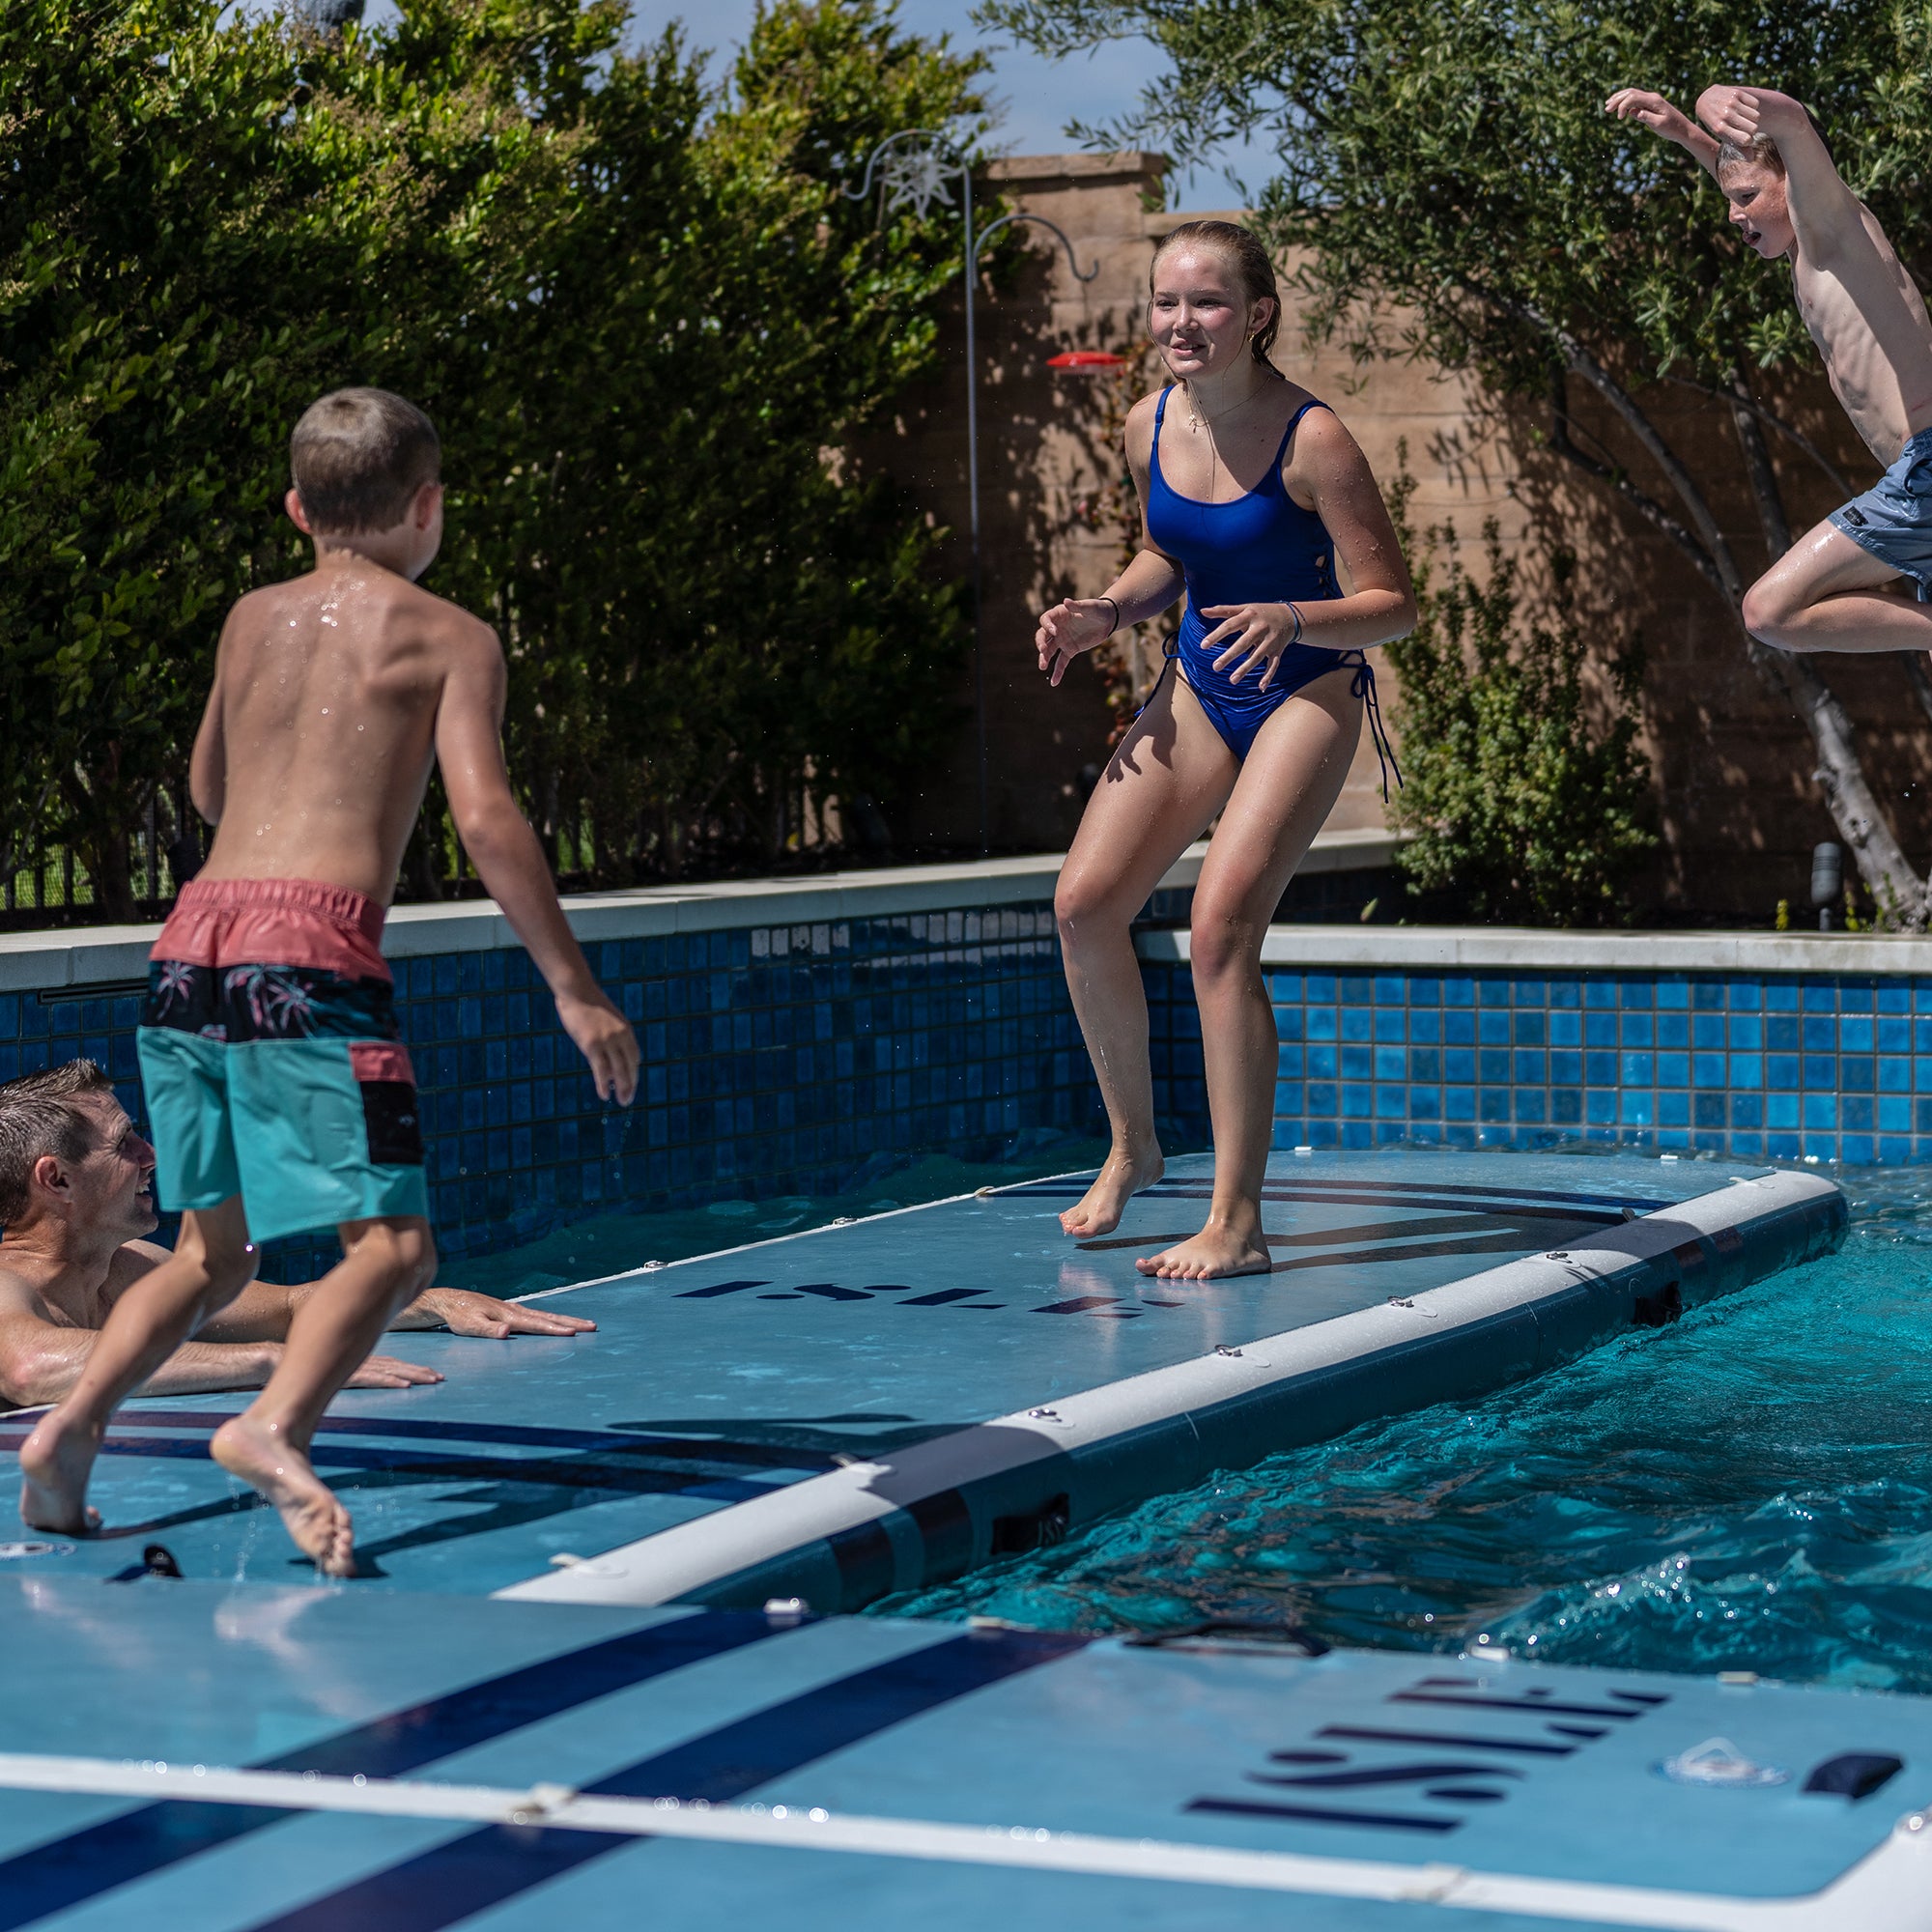 Kids Playing On The Base Camp Blue Inflatable Dock in a Pool